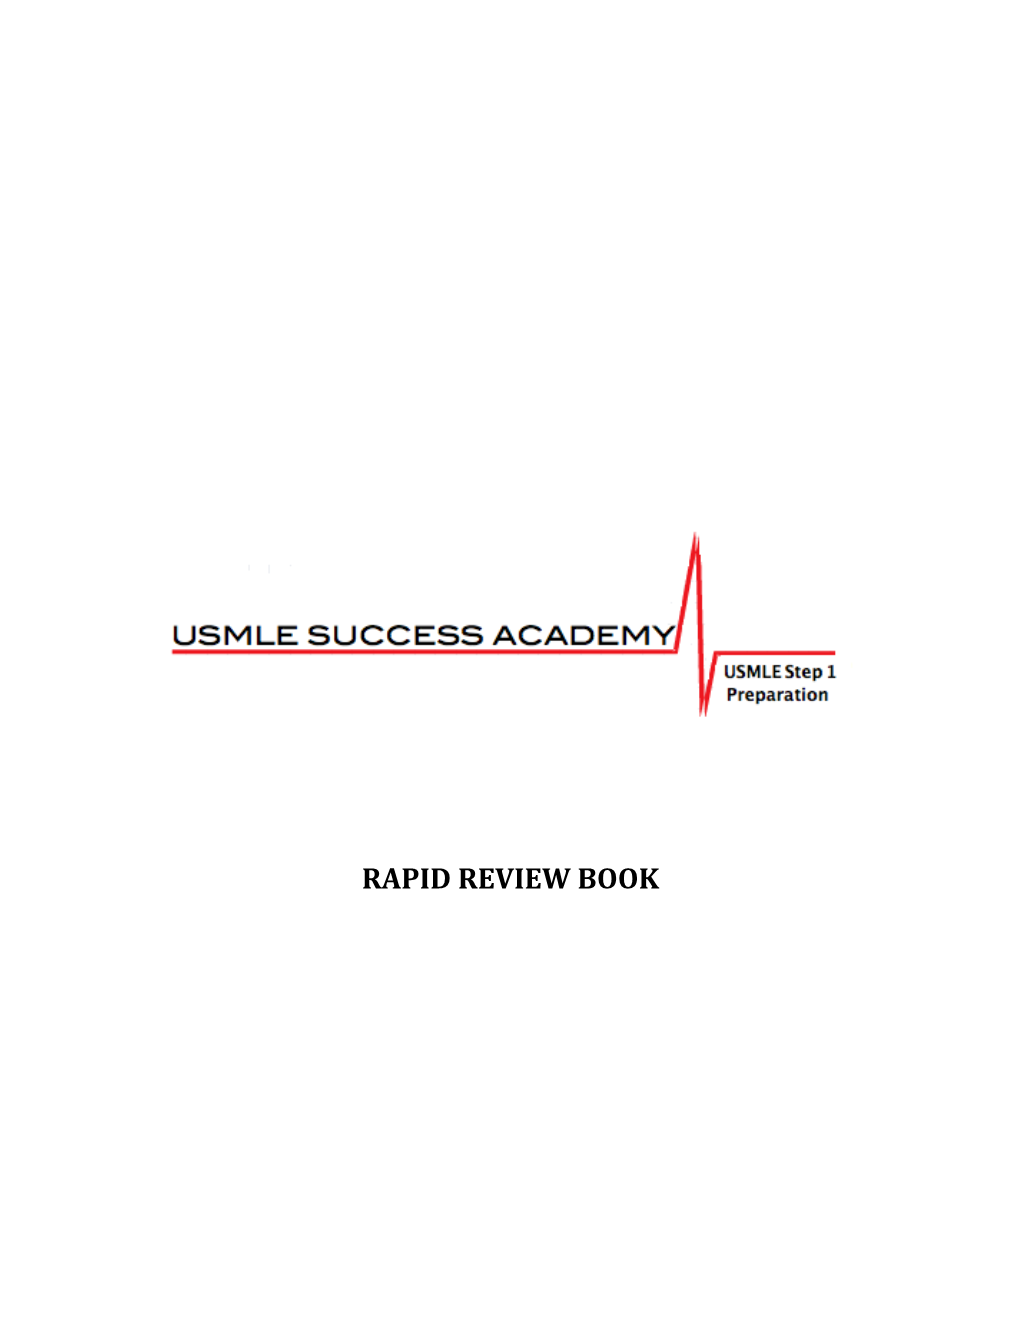 Rapid Review Book